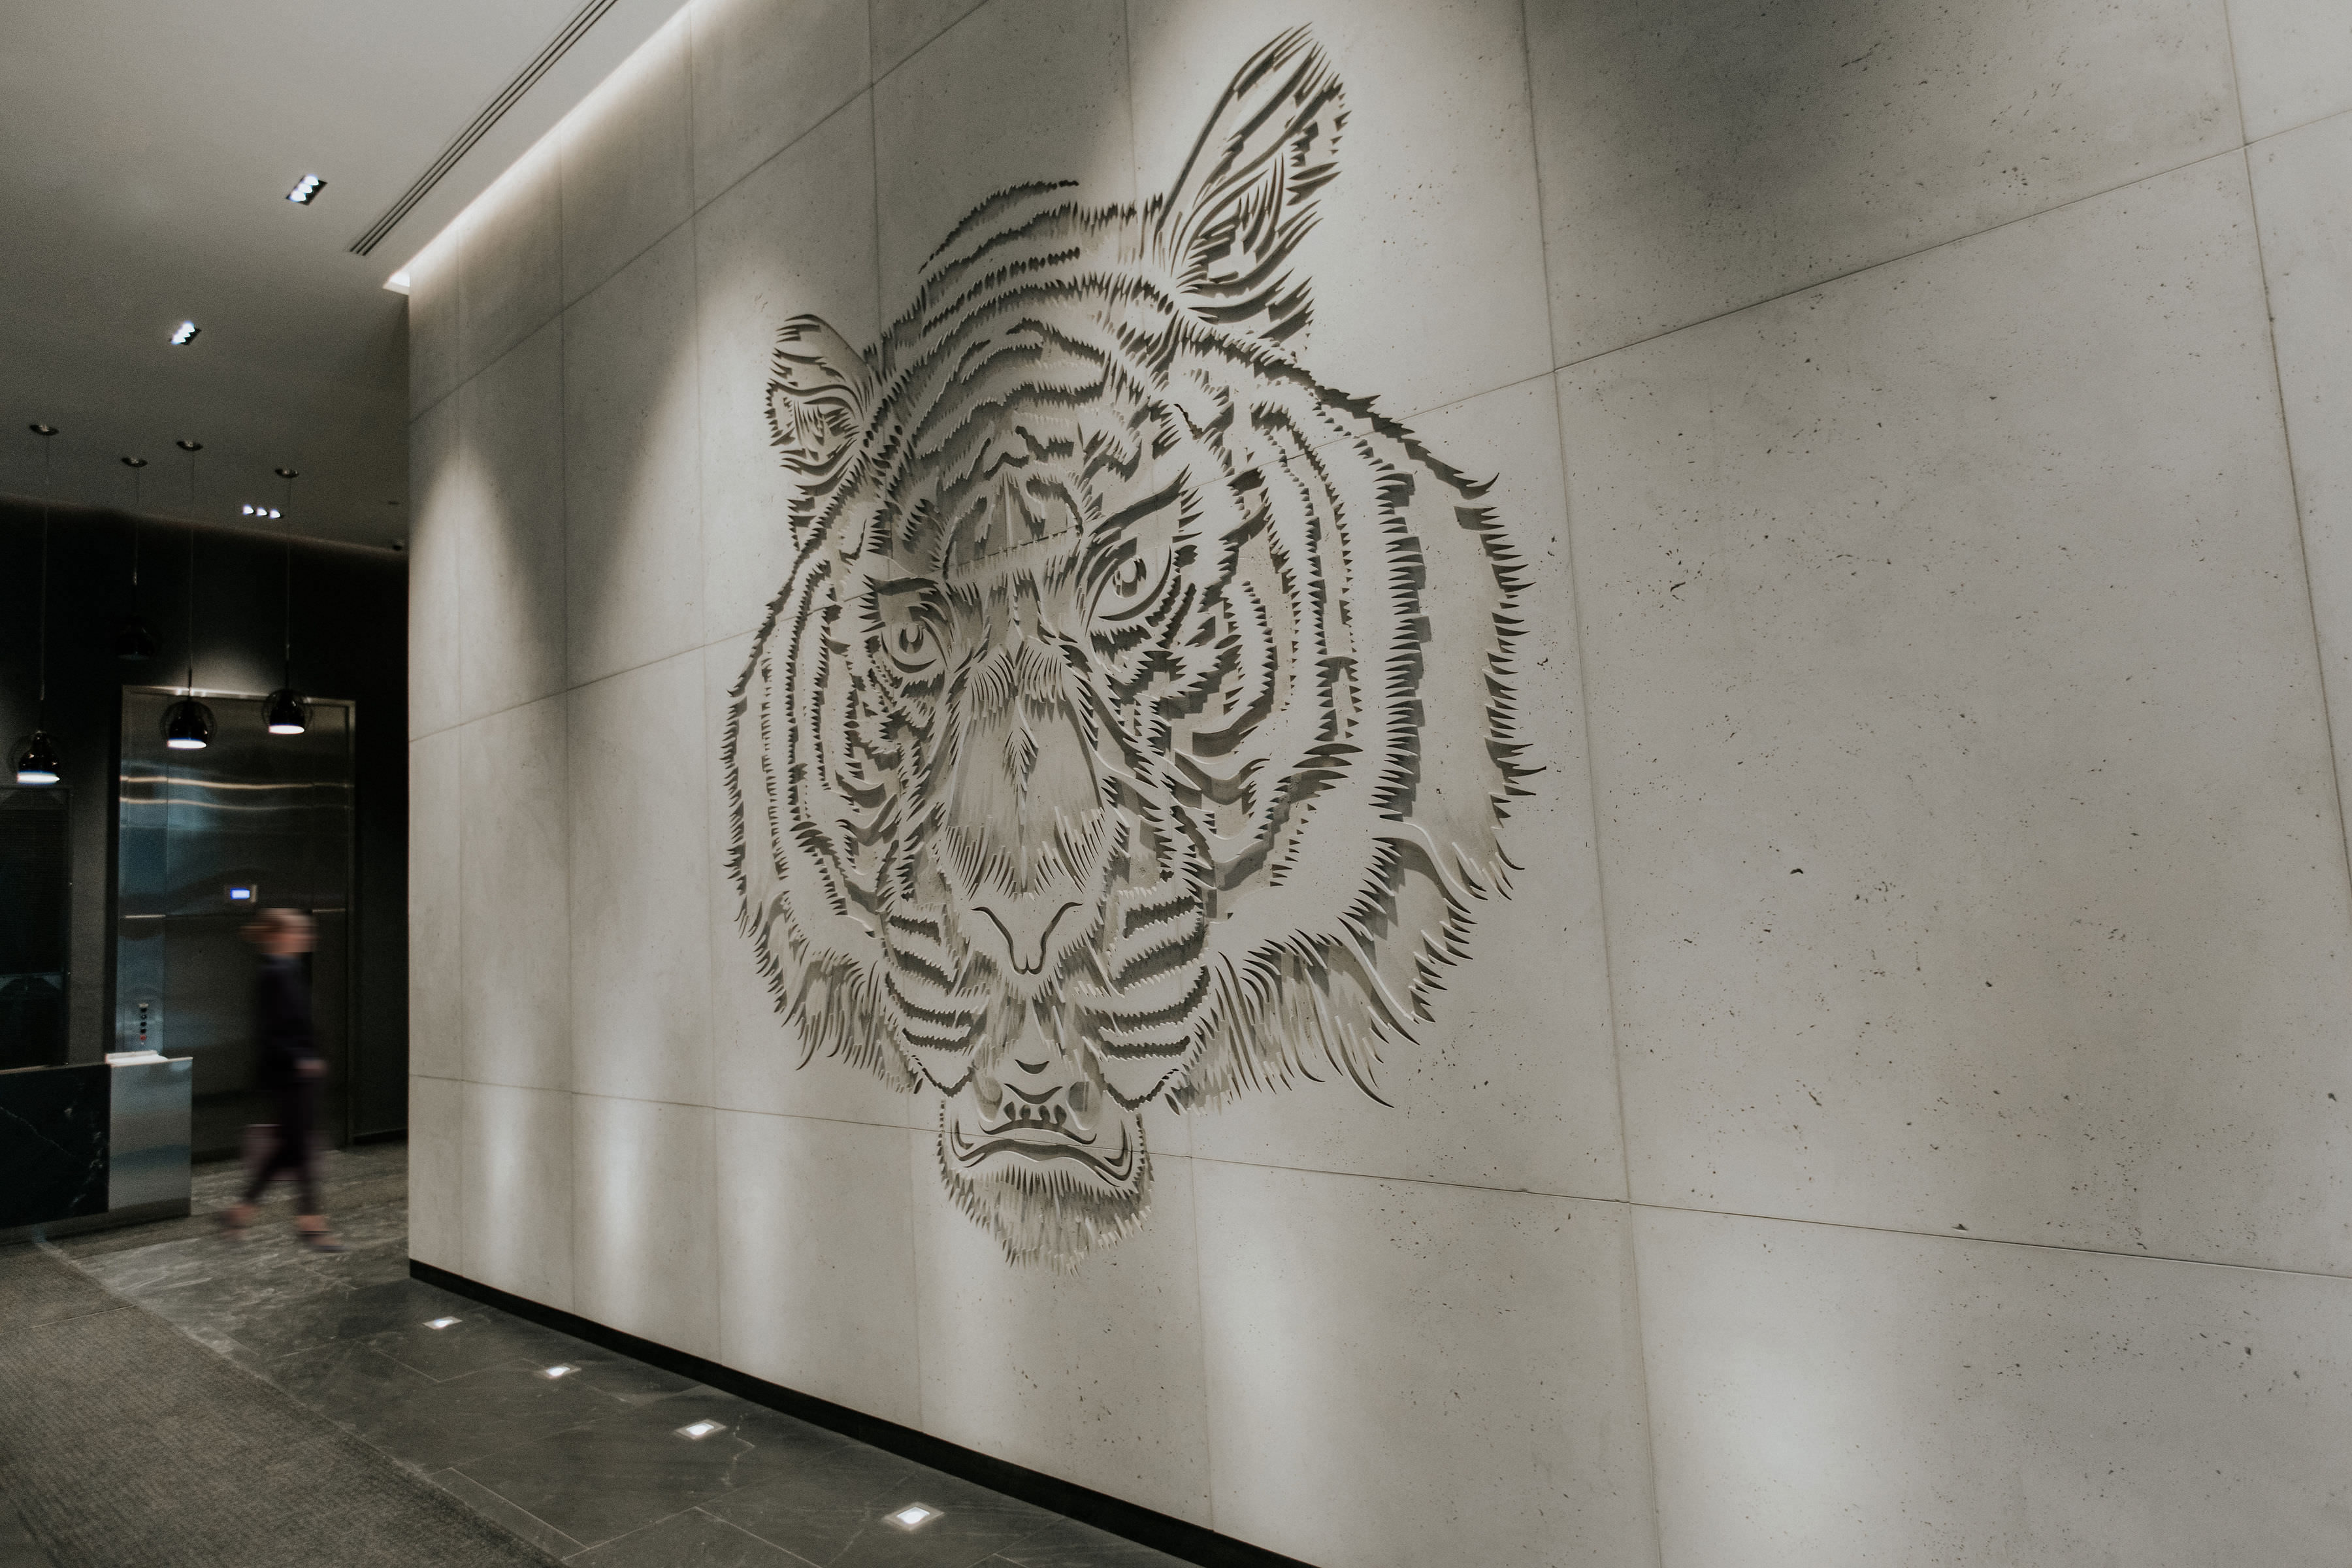 Tiger's face crafted on wall